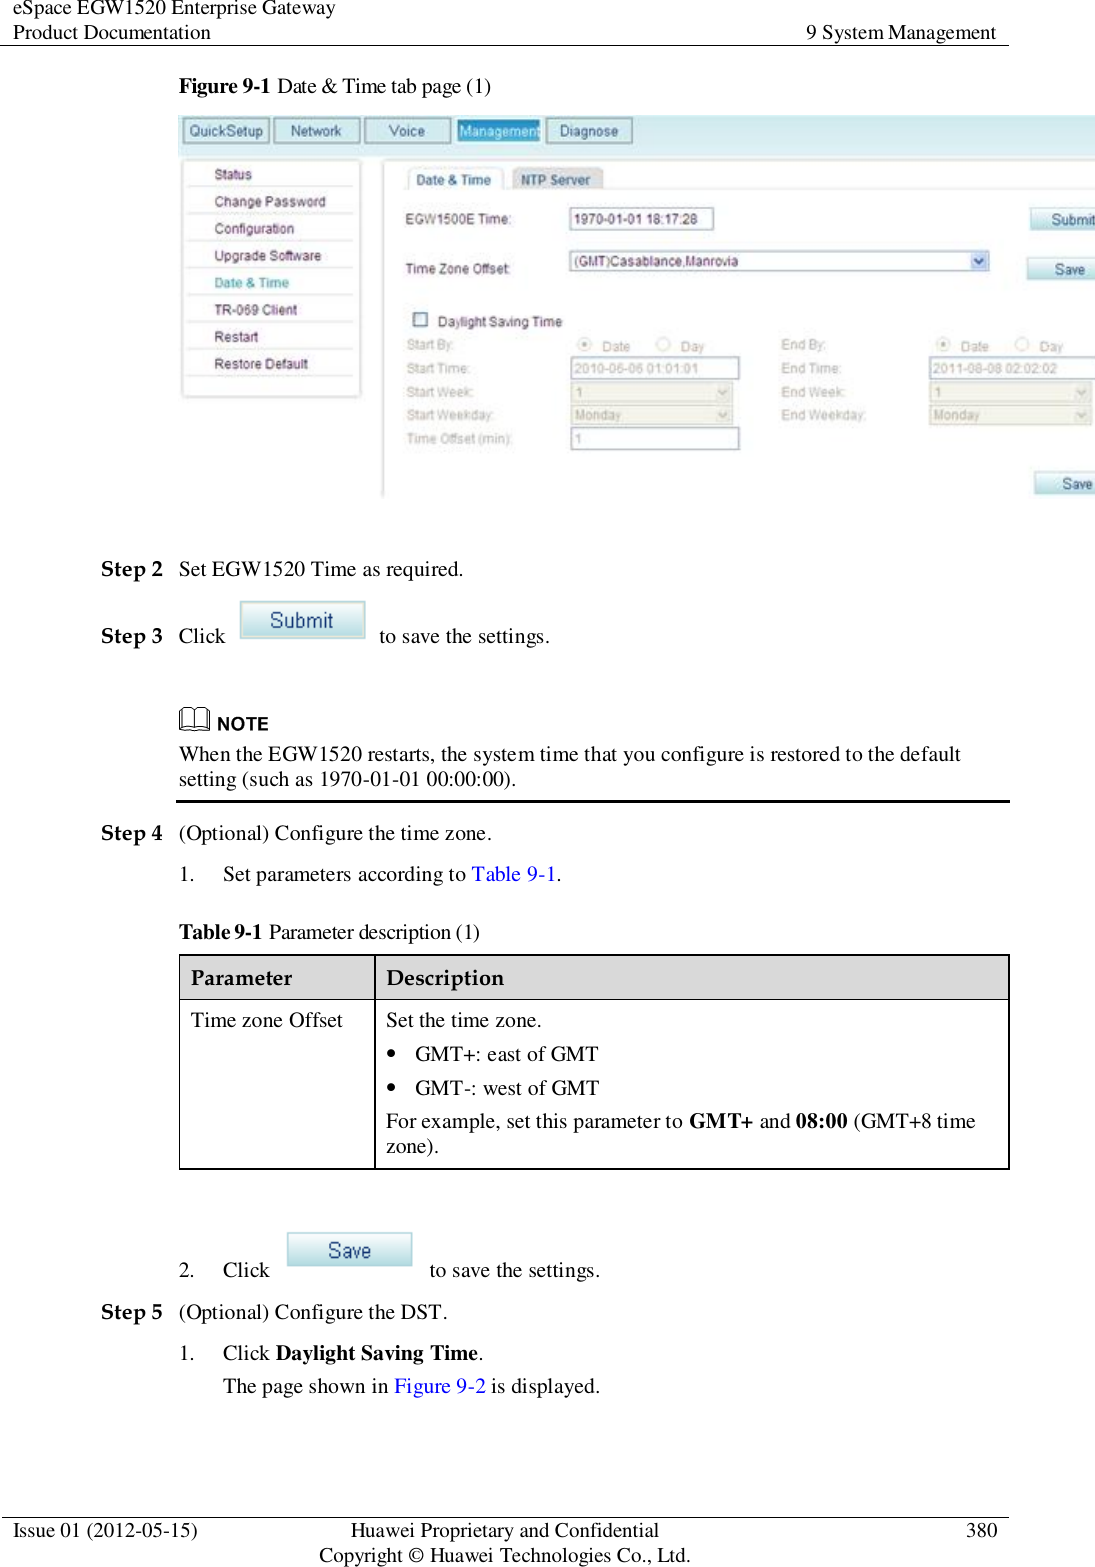 eSpace EGW1520 Enterprise Gateway Product Documentation 9 System Management  Issue 01 (2012-05-15) Huawei Proprietary and Confidential                                     Copyright © Huawei Technologies Co., Ltd. 380  Figure 9-1 Date &amp; Time tab page (1)   Step 2 Set EGW1520 Time as required. Step 3 Click    to save the settings.   When the EGW1520 restarts, the system time that you configure is restored to the default setting (such as 1970-01-01 00:00:00). Step 4 (Optional) Configure the time zone. 1. Set parameters according to Table 9-1. Table 9-1 Parameter description (1) Parameter Description Time zone Offset Set the time zone.  GMT+: east of GMT  GMT-: west of GMT For example, set this parameter to GMT+ and 08:00 (GMT+8 time zone).  2. Click    to save the settings. Step 5 (Optional) Configure the DST. 1. Click Daylight Saving Time. The page shown in Figure 9-2 is displayed. 